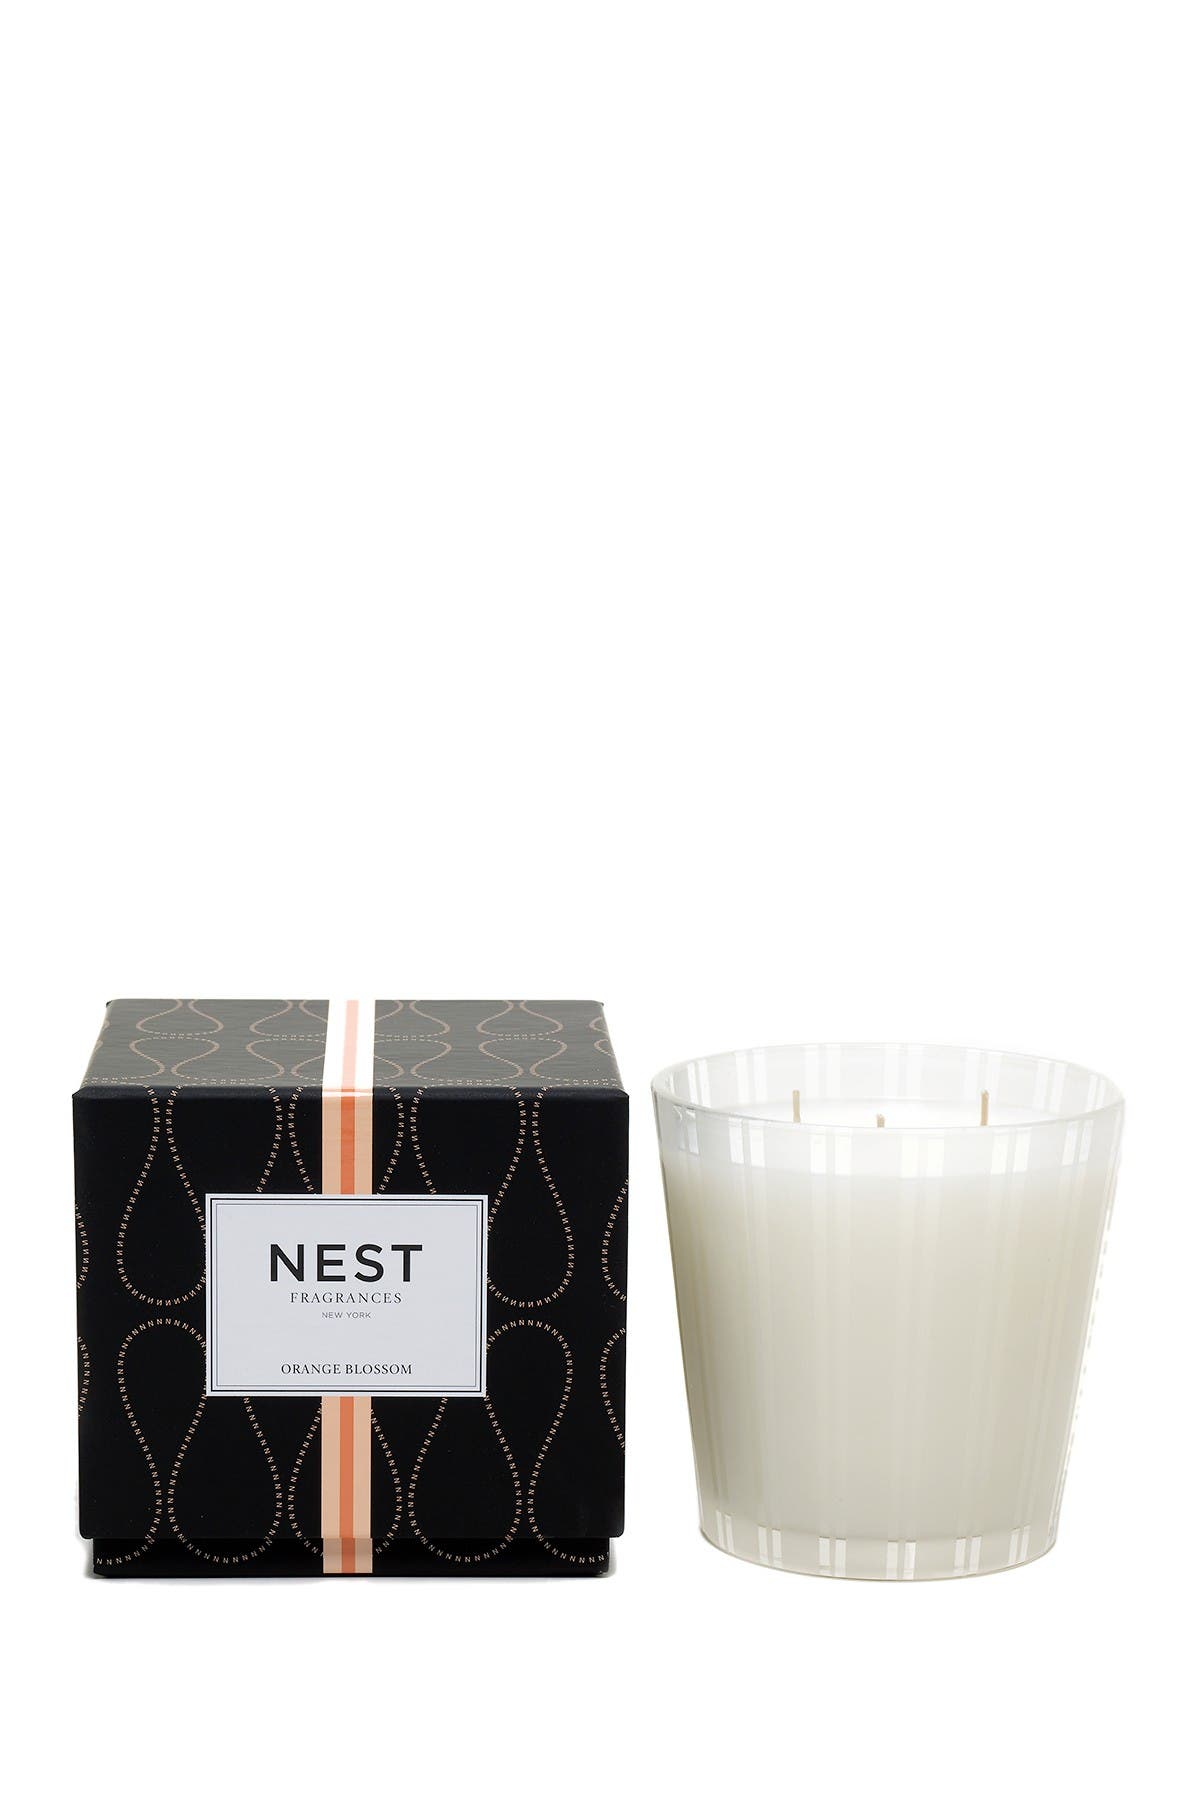 Nest Fragrances 3-wick Candle